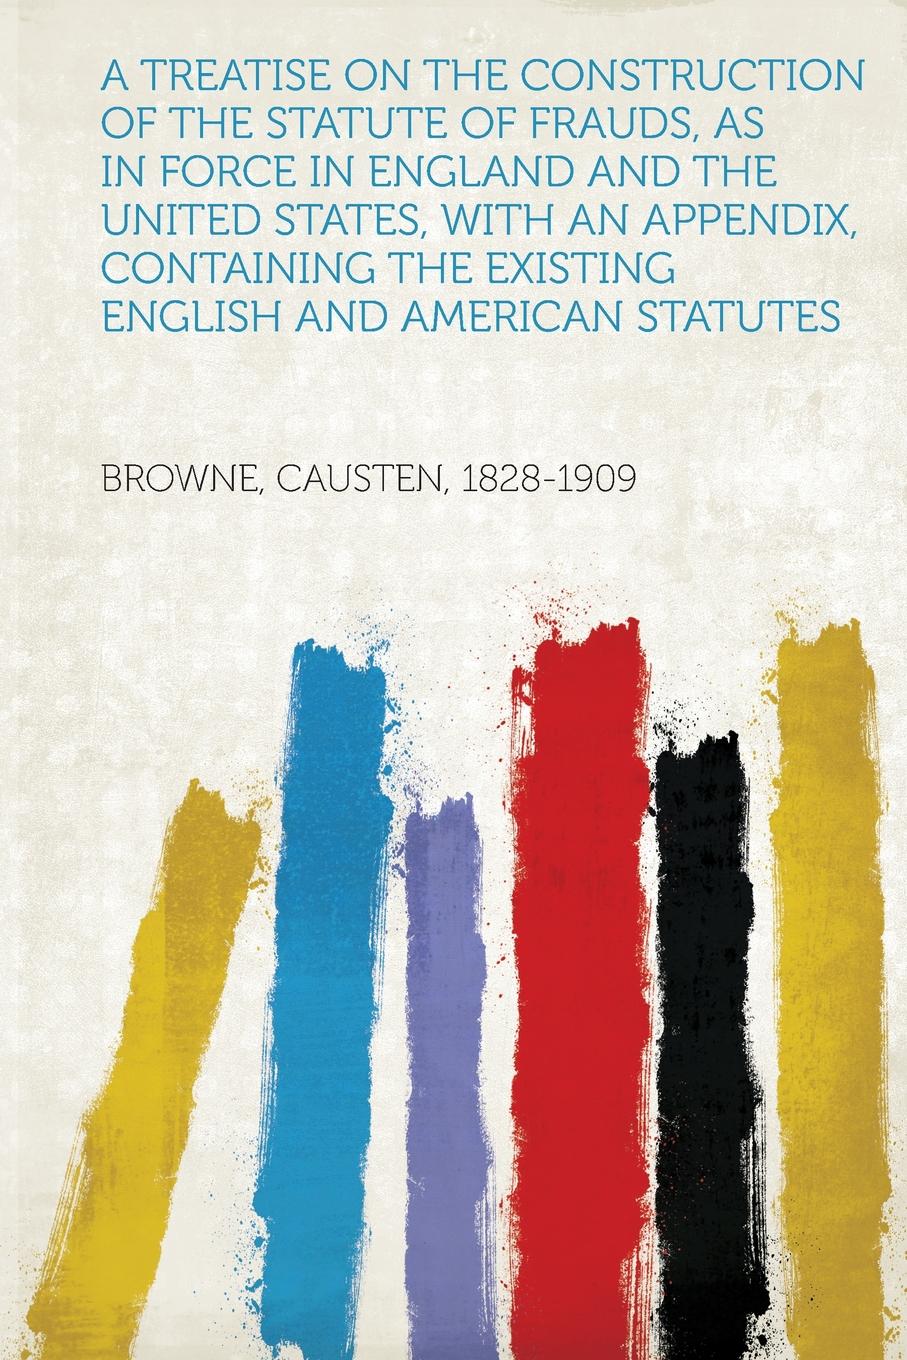 A Treatise on the Construction of the Statute of Frauds, as in Force in England and the United States, With an Appendix, Containing the Existing English and American Statutes